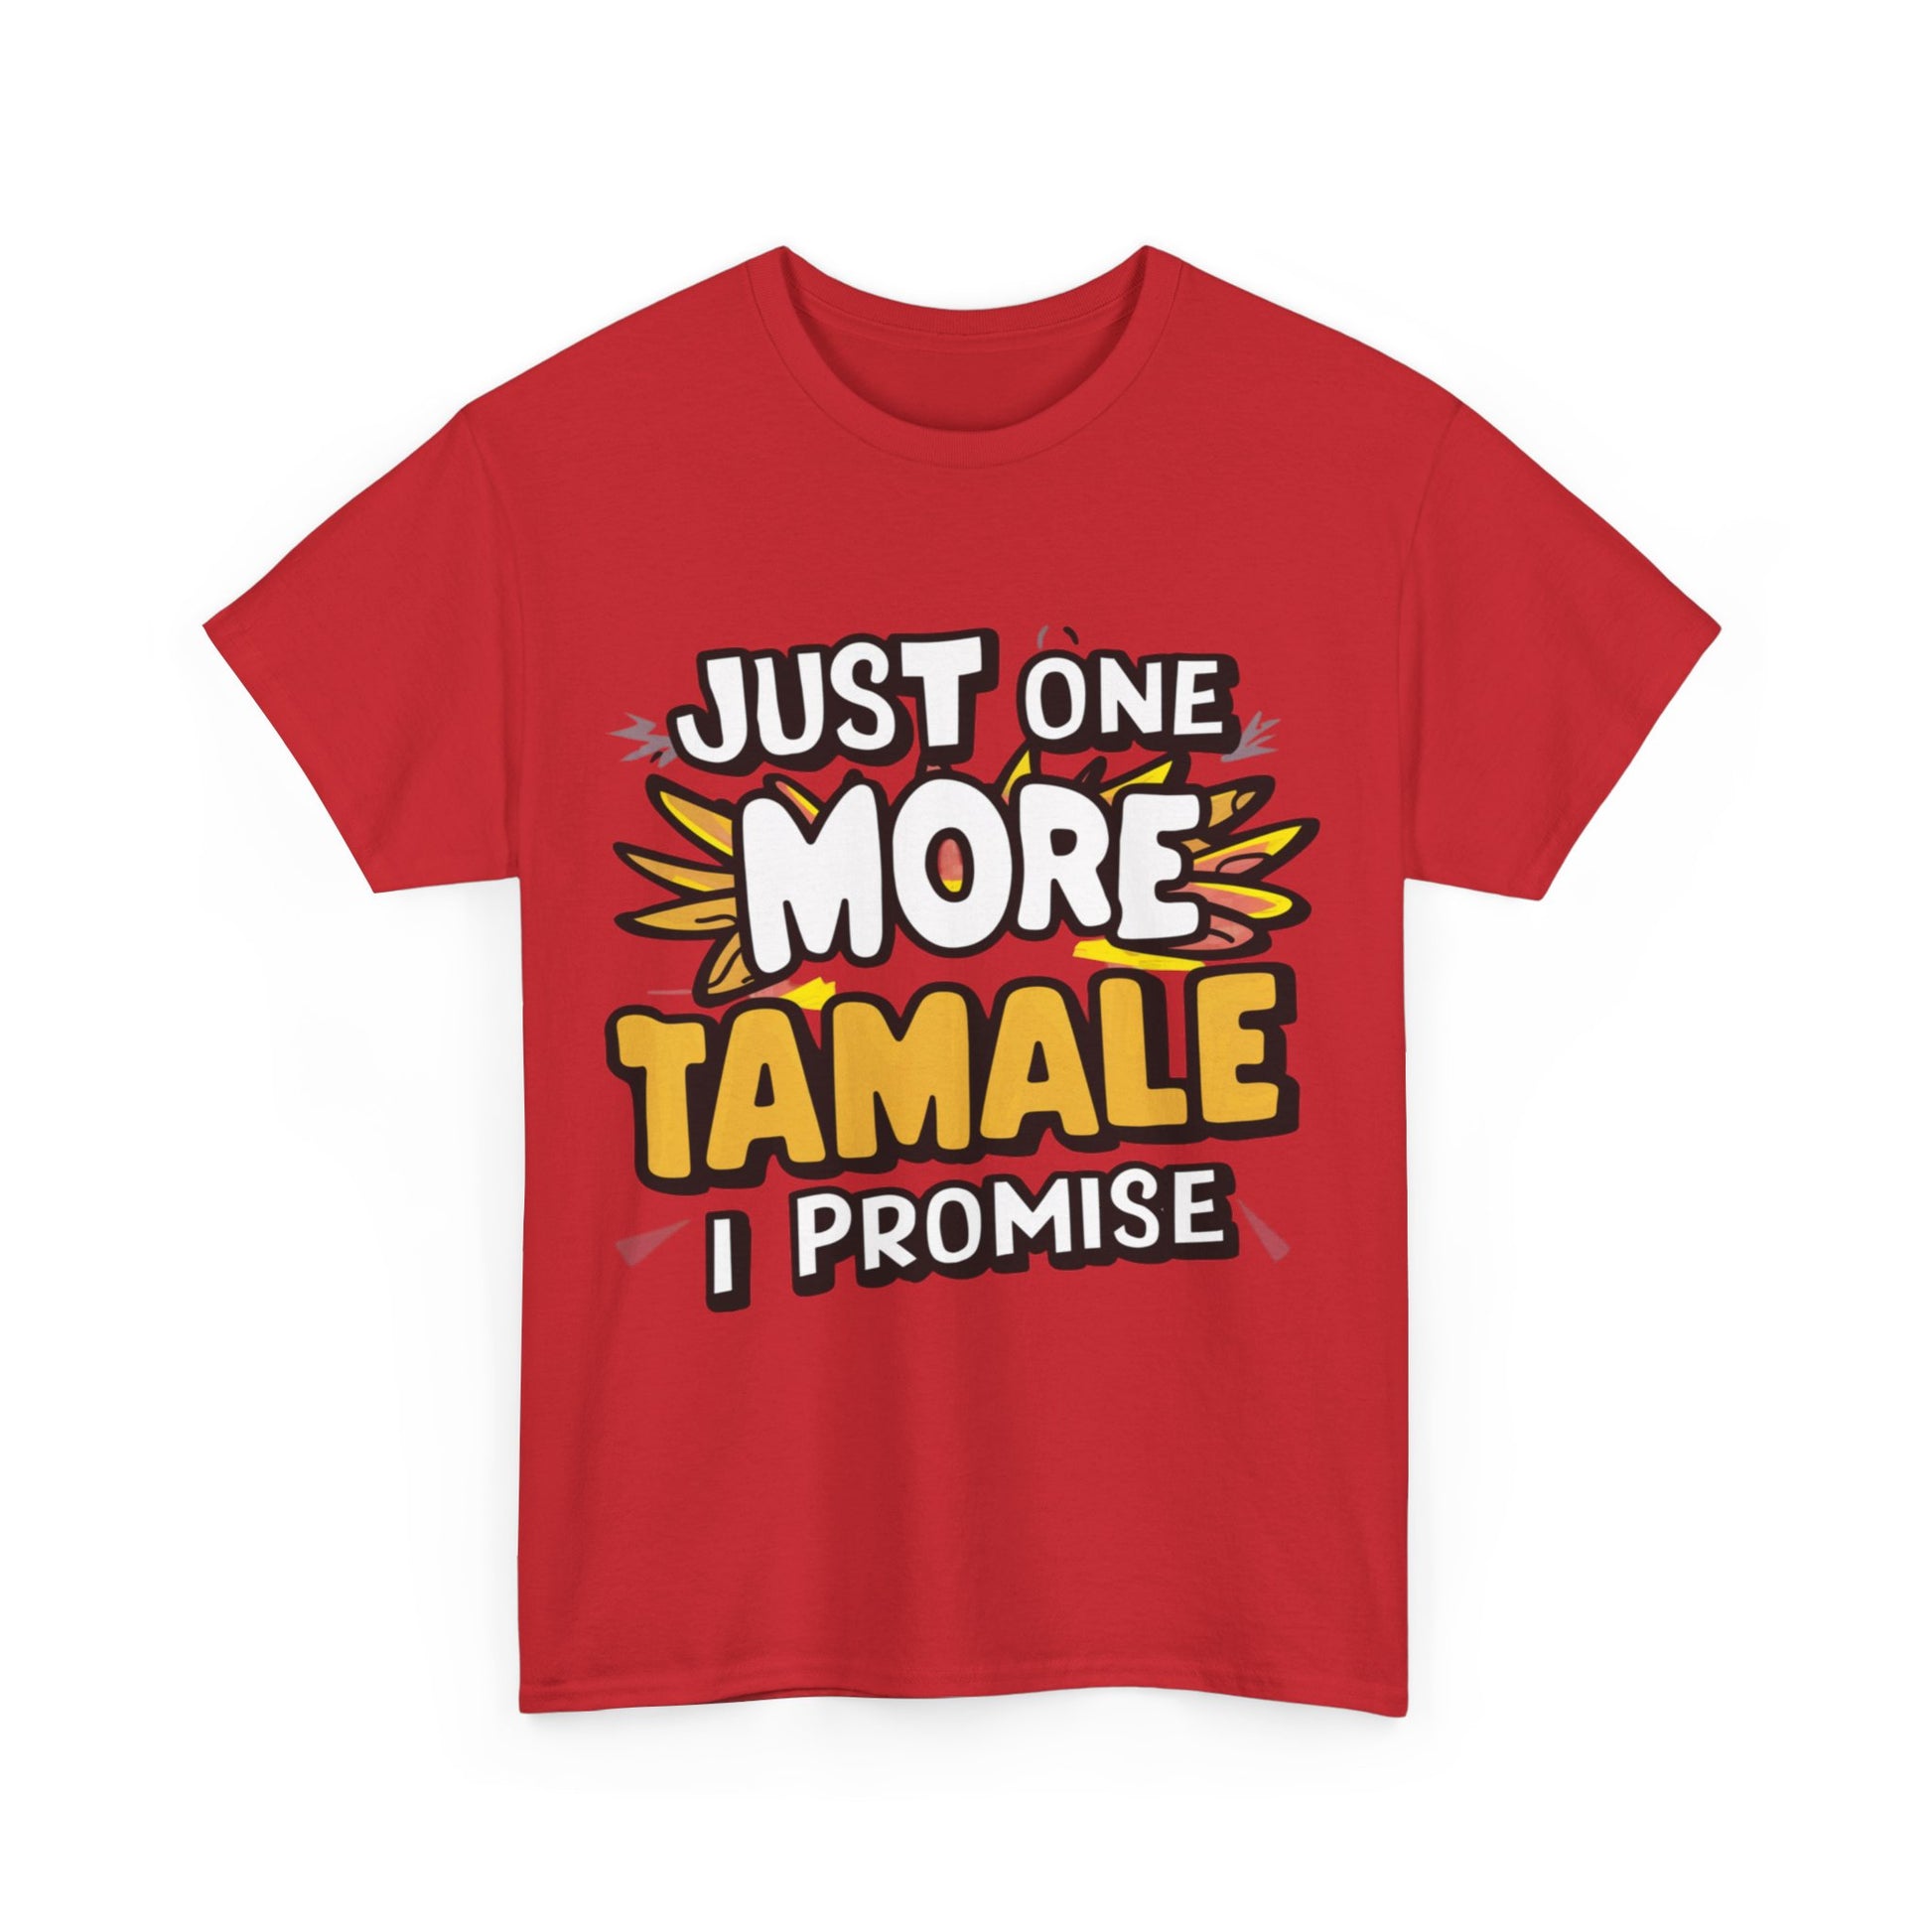 Just One More Tamale I Promise Mexican Food Graphic Unisex Heavy Cotton Tee Cotton Funny Humorous Graphic Soft Premium Unisex Men Women Red T-shirt Birthday Gift-33